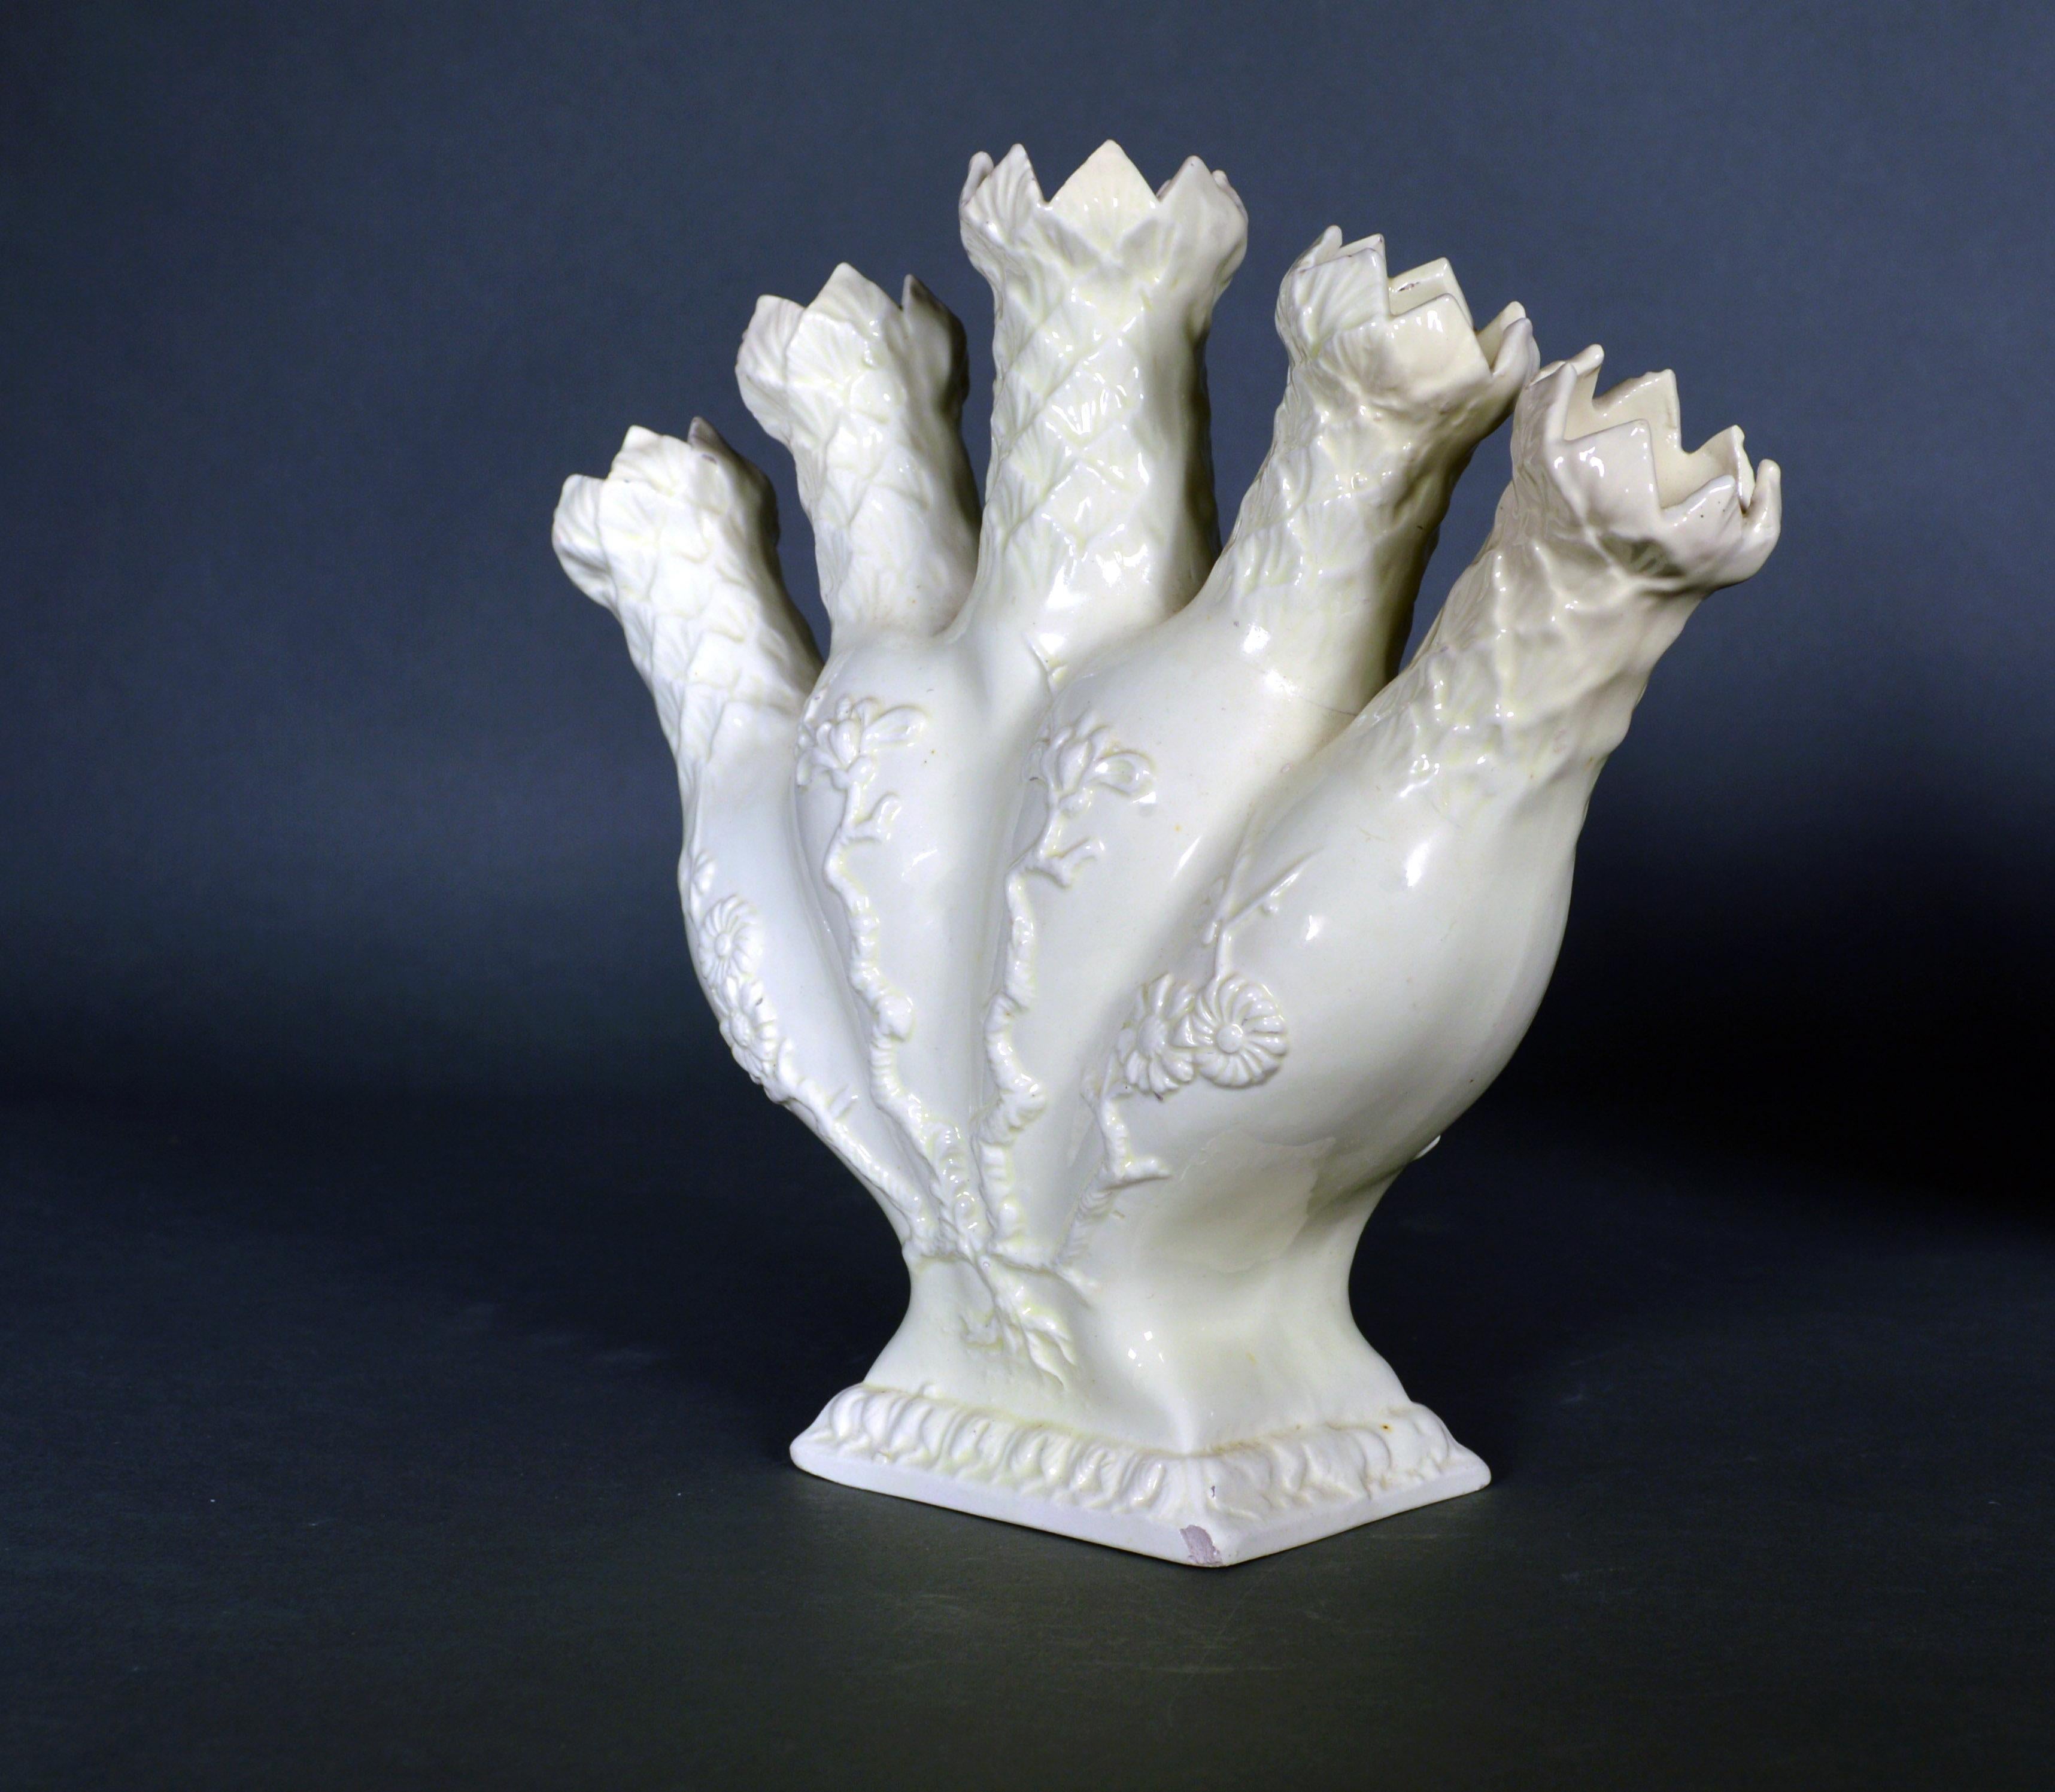 Creamware finger or quintal Vase,
19th century,

The English pottery creamware finger or quintal vases The five-fingered flower vase has a molded design of branches and flowers issuing from roots starting close to the base and the top of each